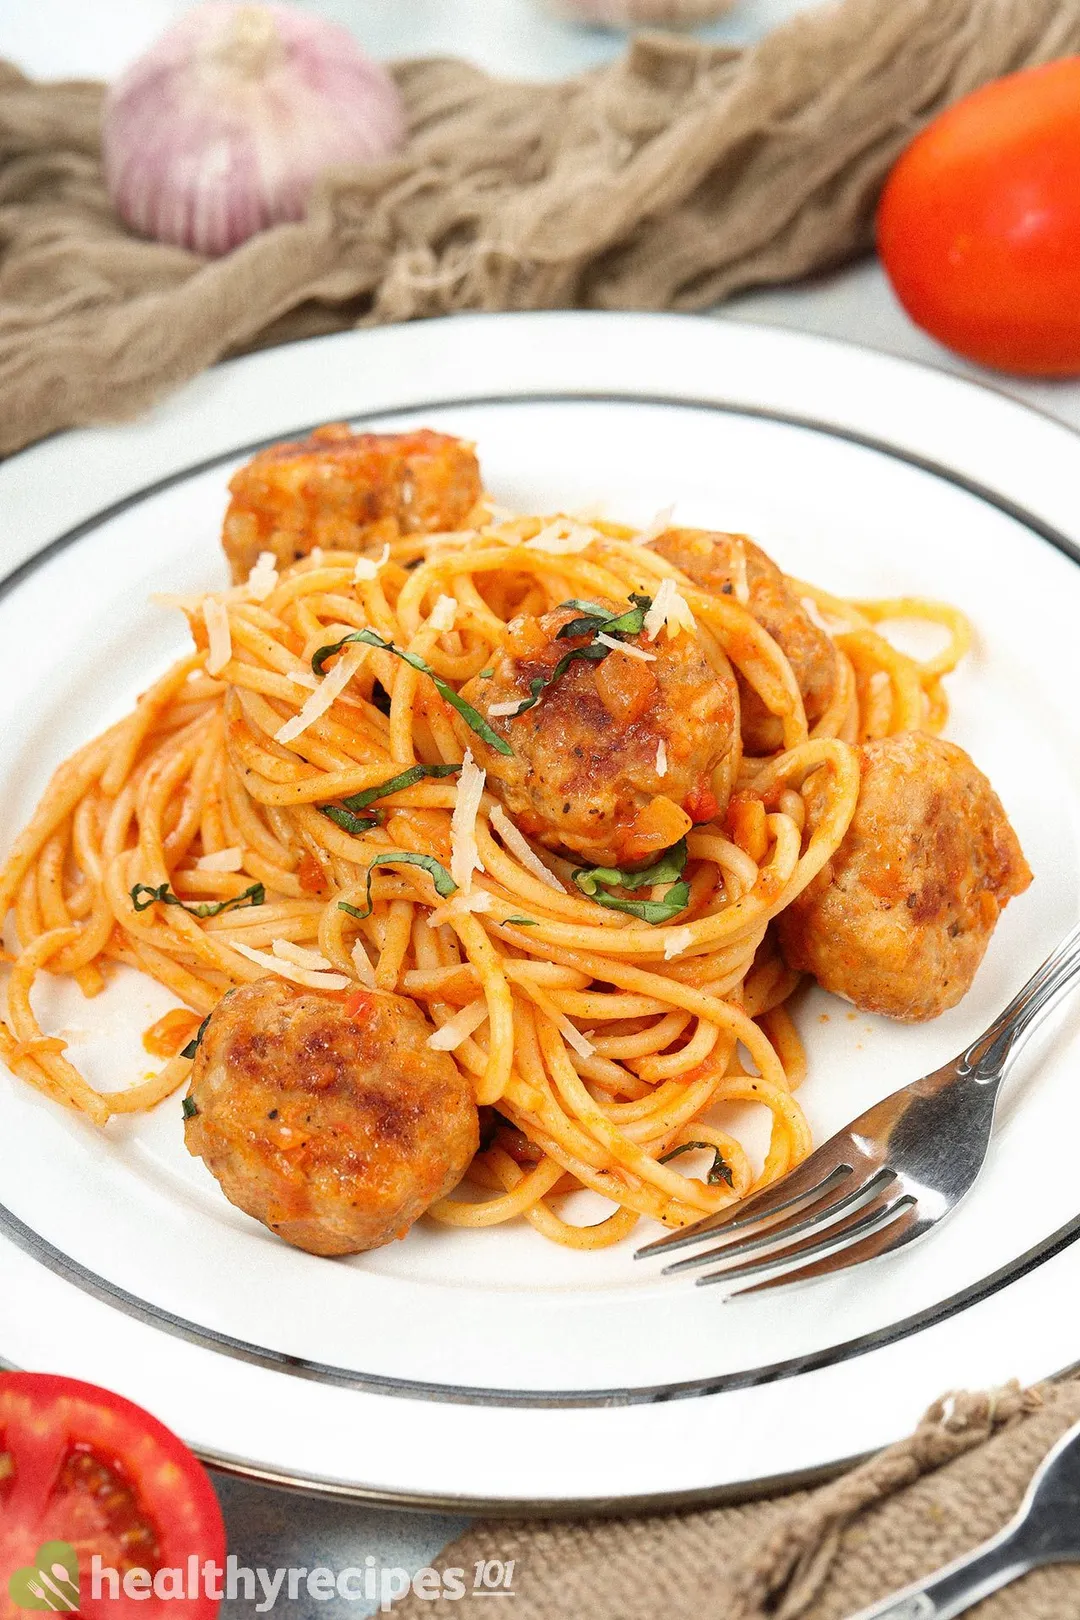 A plate of chicken meatballs served with spaghetti